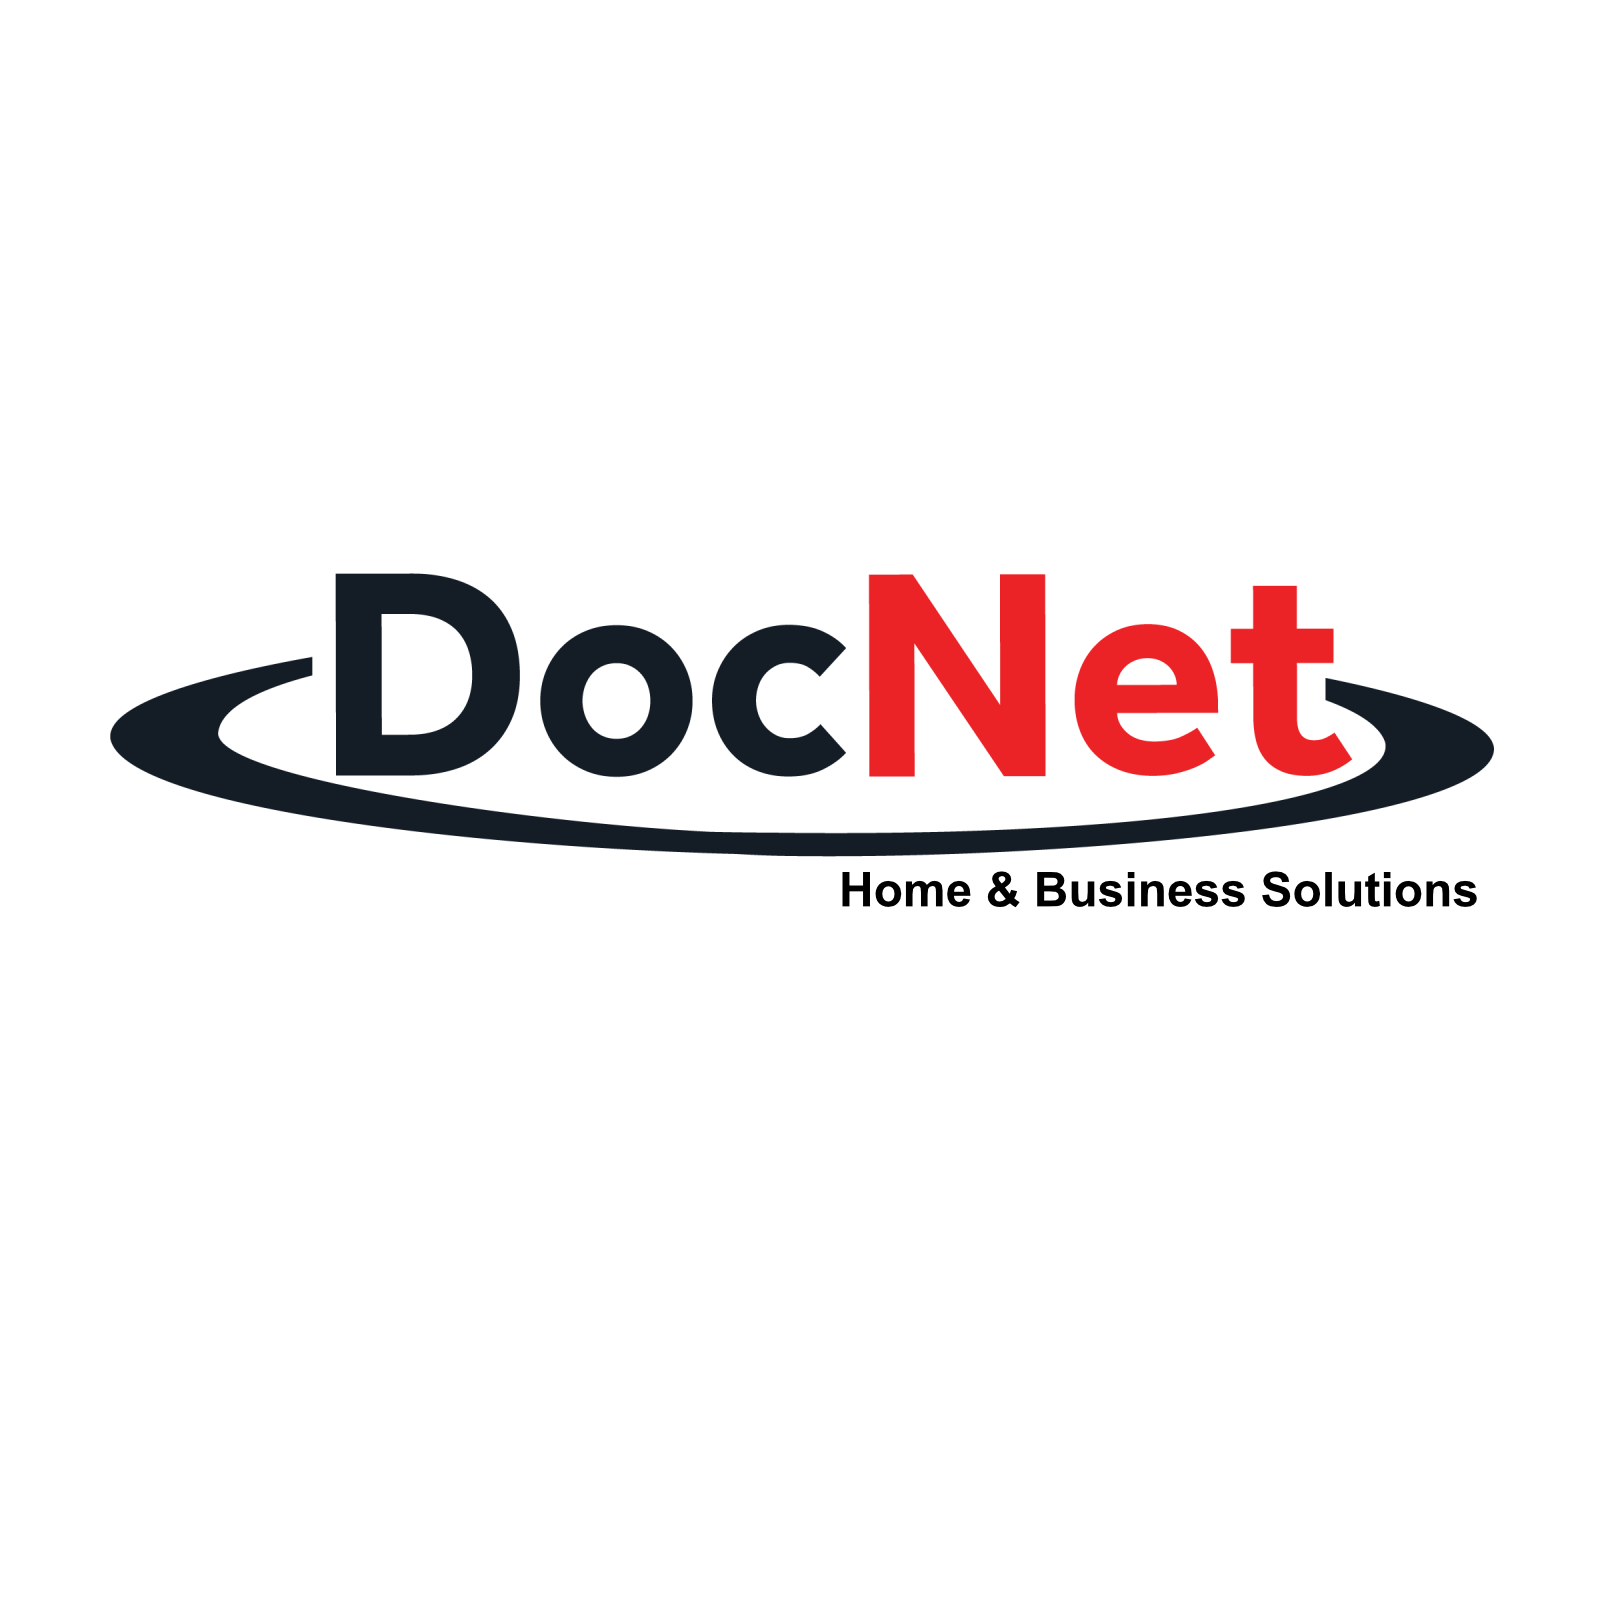 DocNet Home and Business Solutions